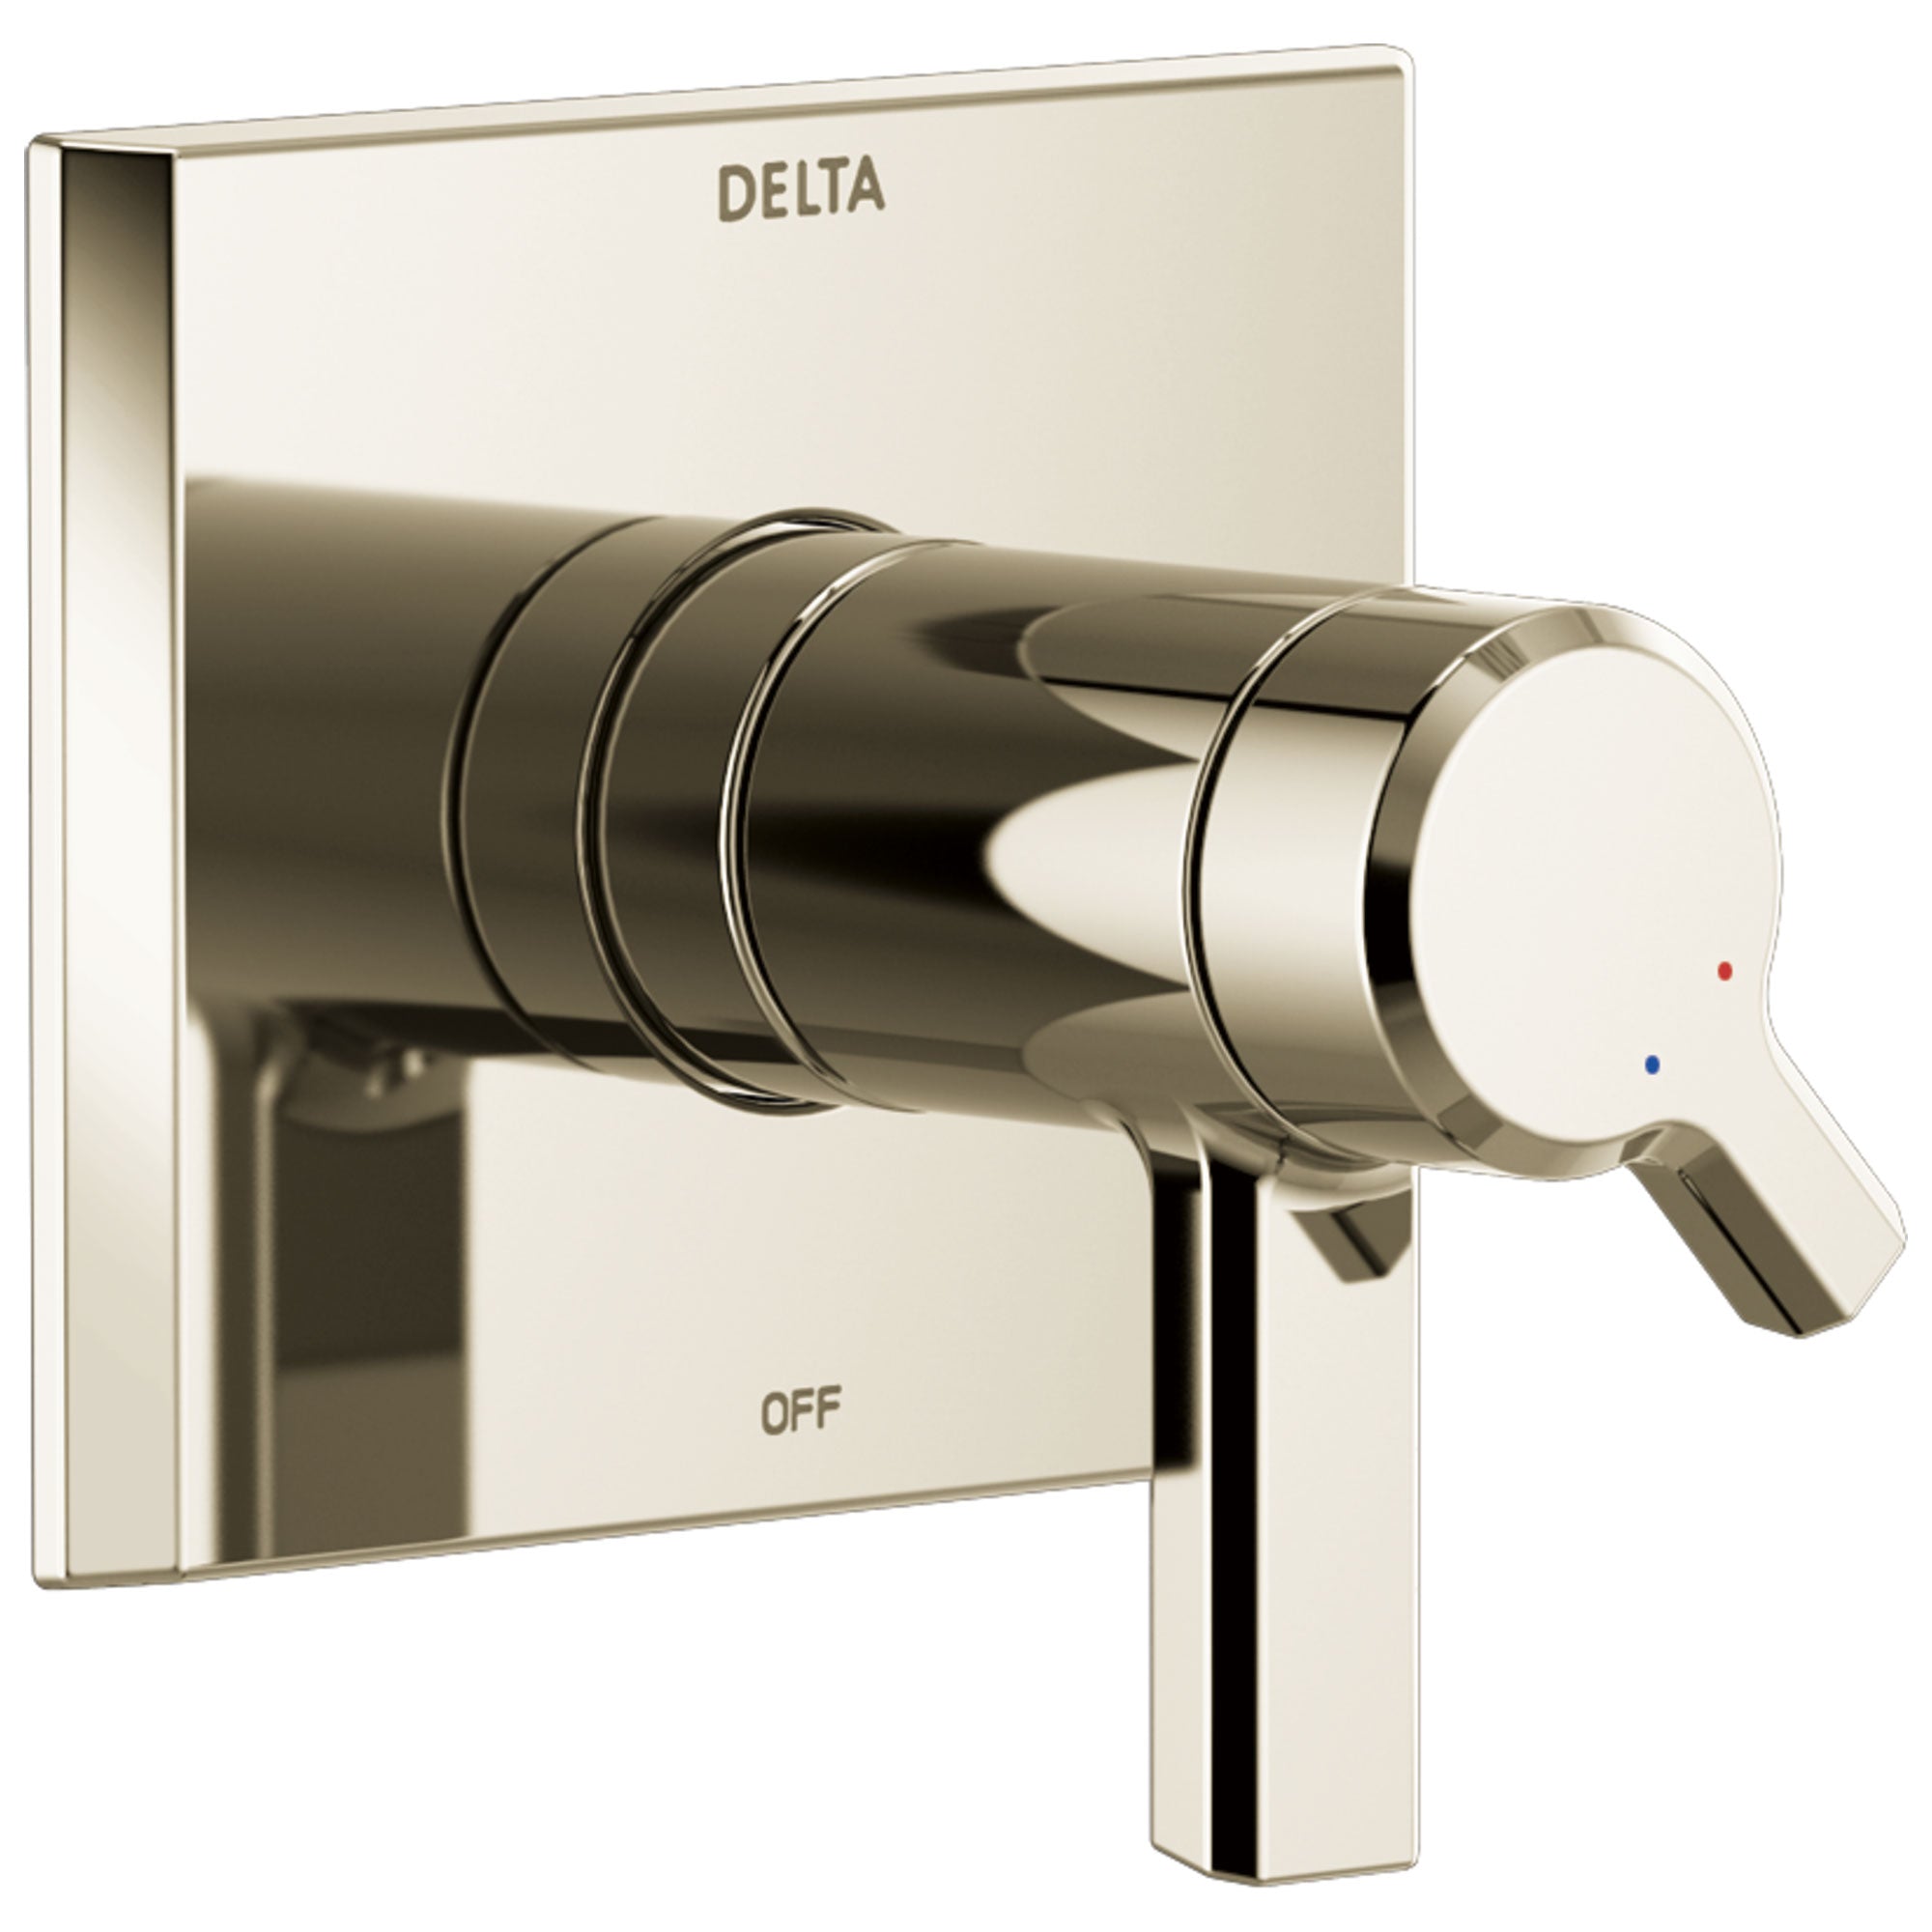 Delta Pivotal Polished Nickel Finish Thermostatic Shower Faucet Dual Handle Control Includes 17T Cartridge, Handles, and Valve with Stops D3304V